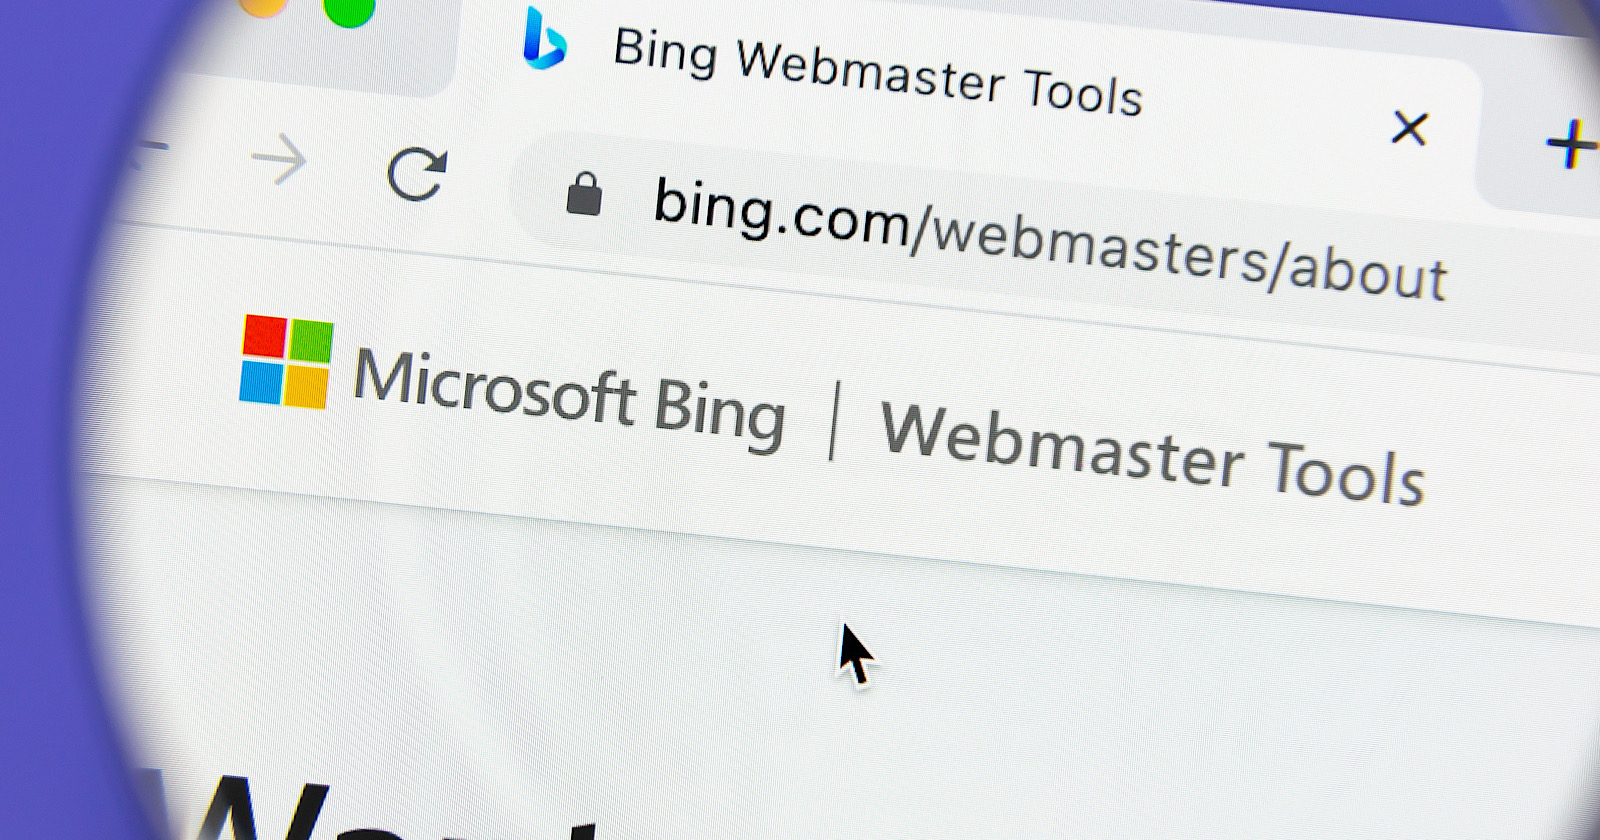 Bing Webmaster Tools website. Bing Webmaster Tools allows webmasters to add their websites to the Bing index crawler.